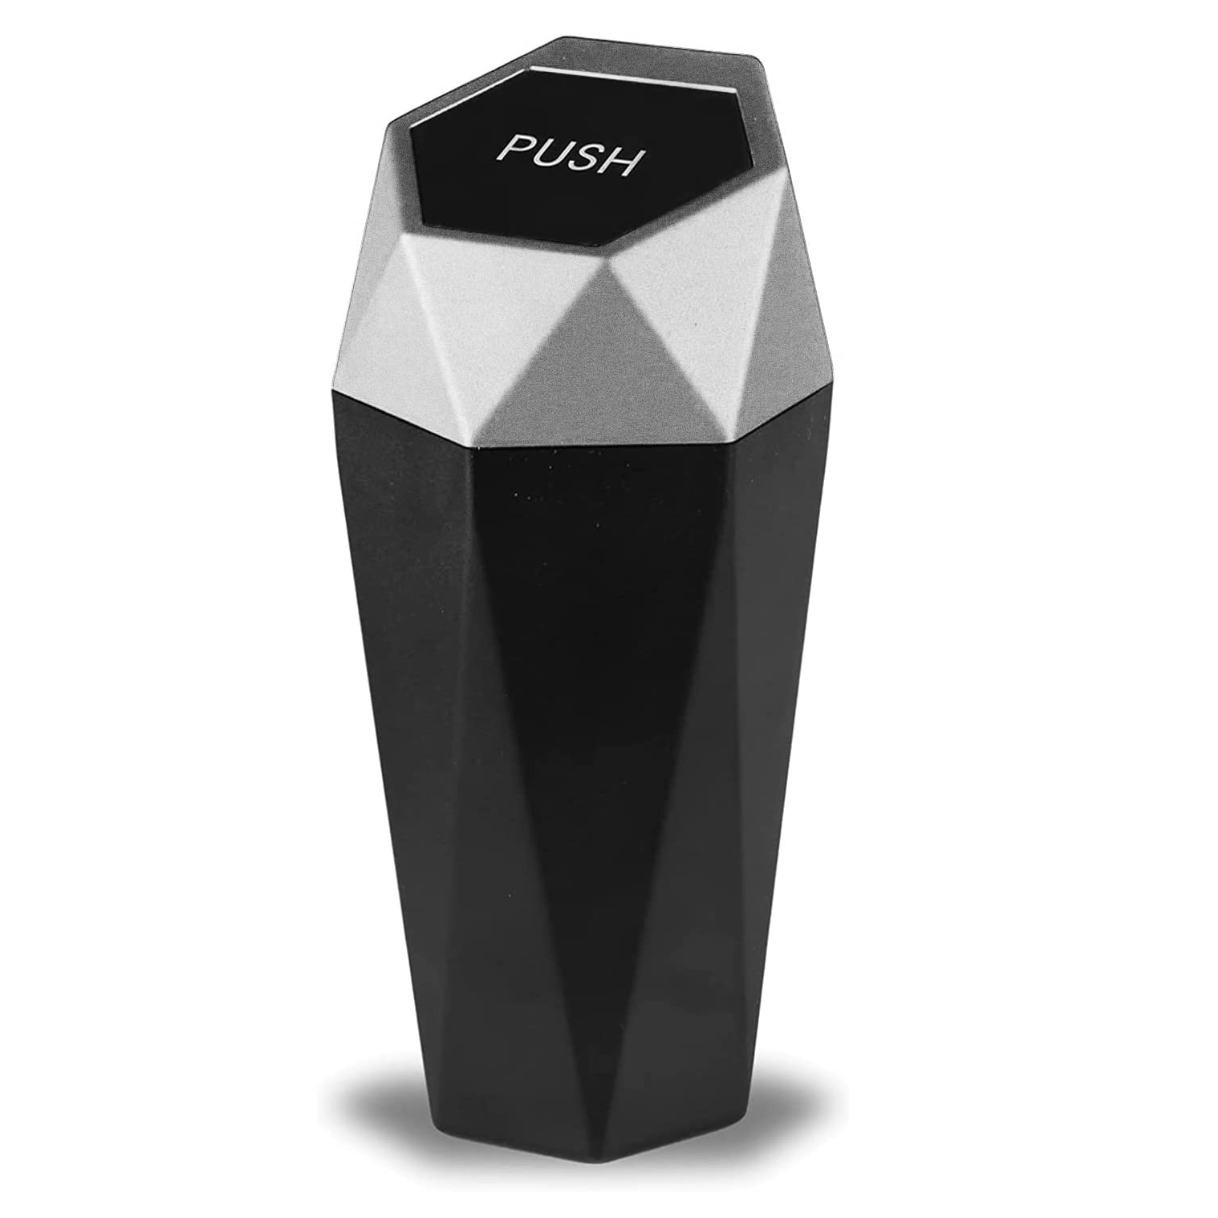 Wontolf Car Trash Can Bin with Lid, Small Car Garbage Can with Trash Bags  Diamond Design Leakproof Mini Car Accessories Trash Bin Car Dustbin  Organizer Container for Car Office Home - Yahoo